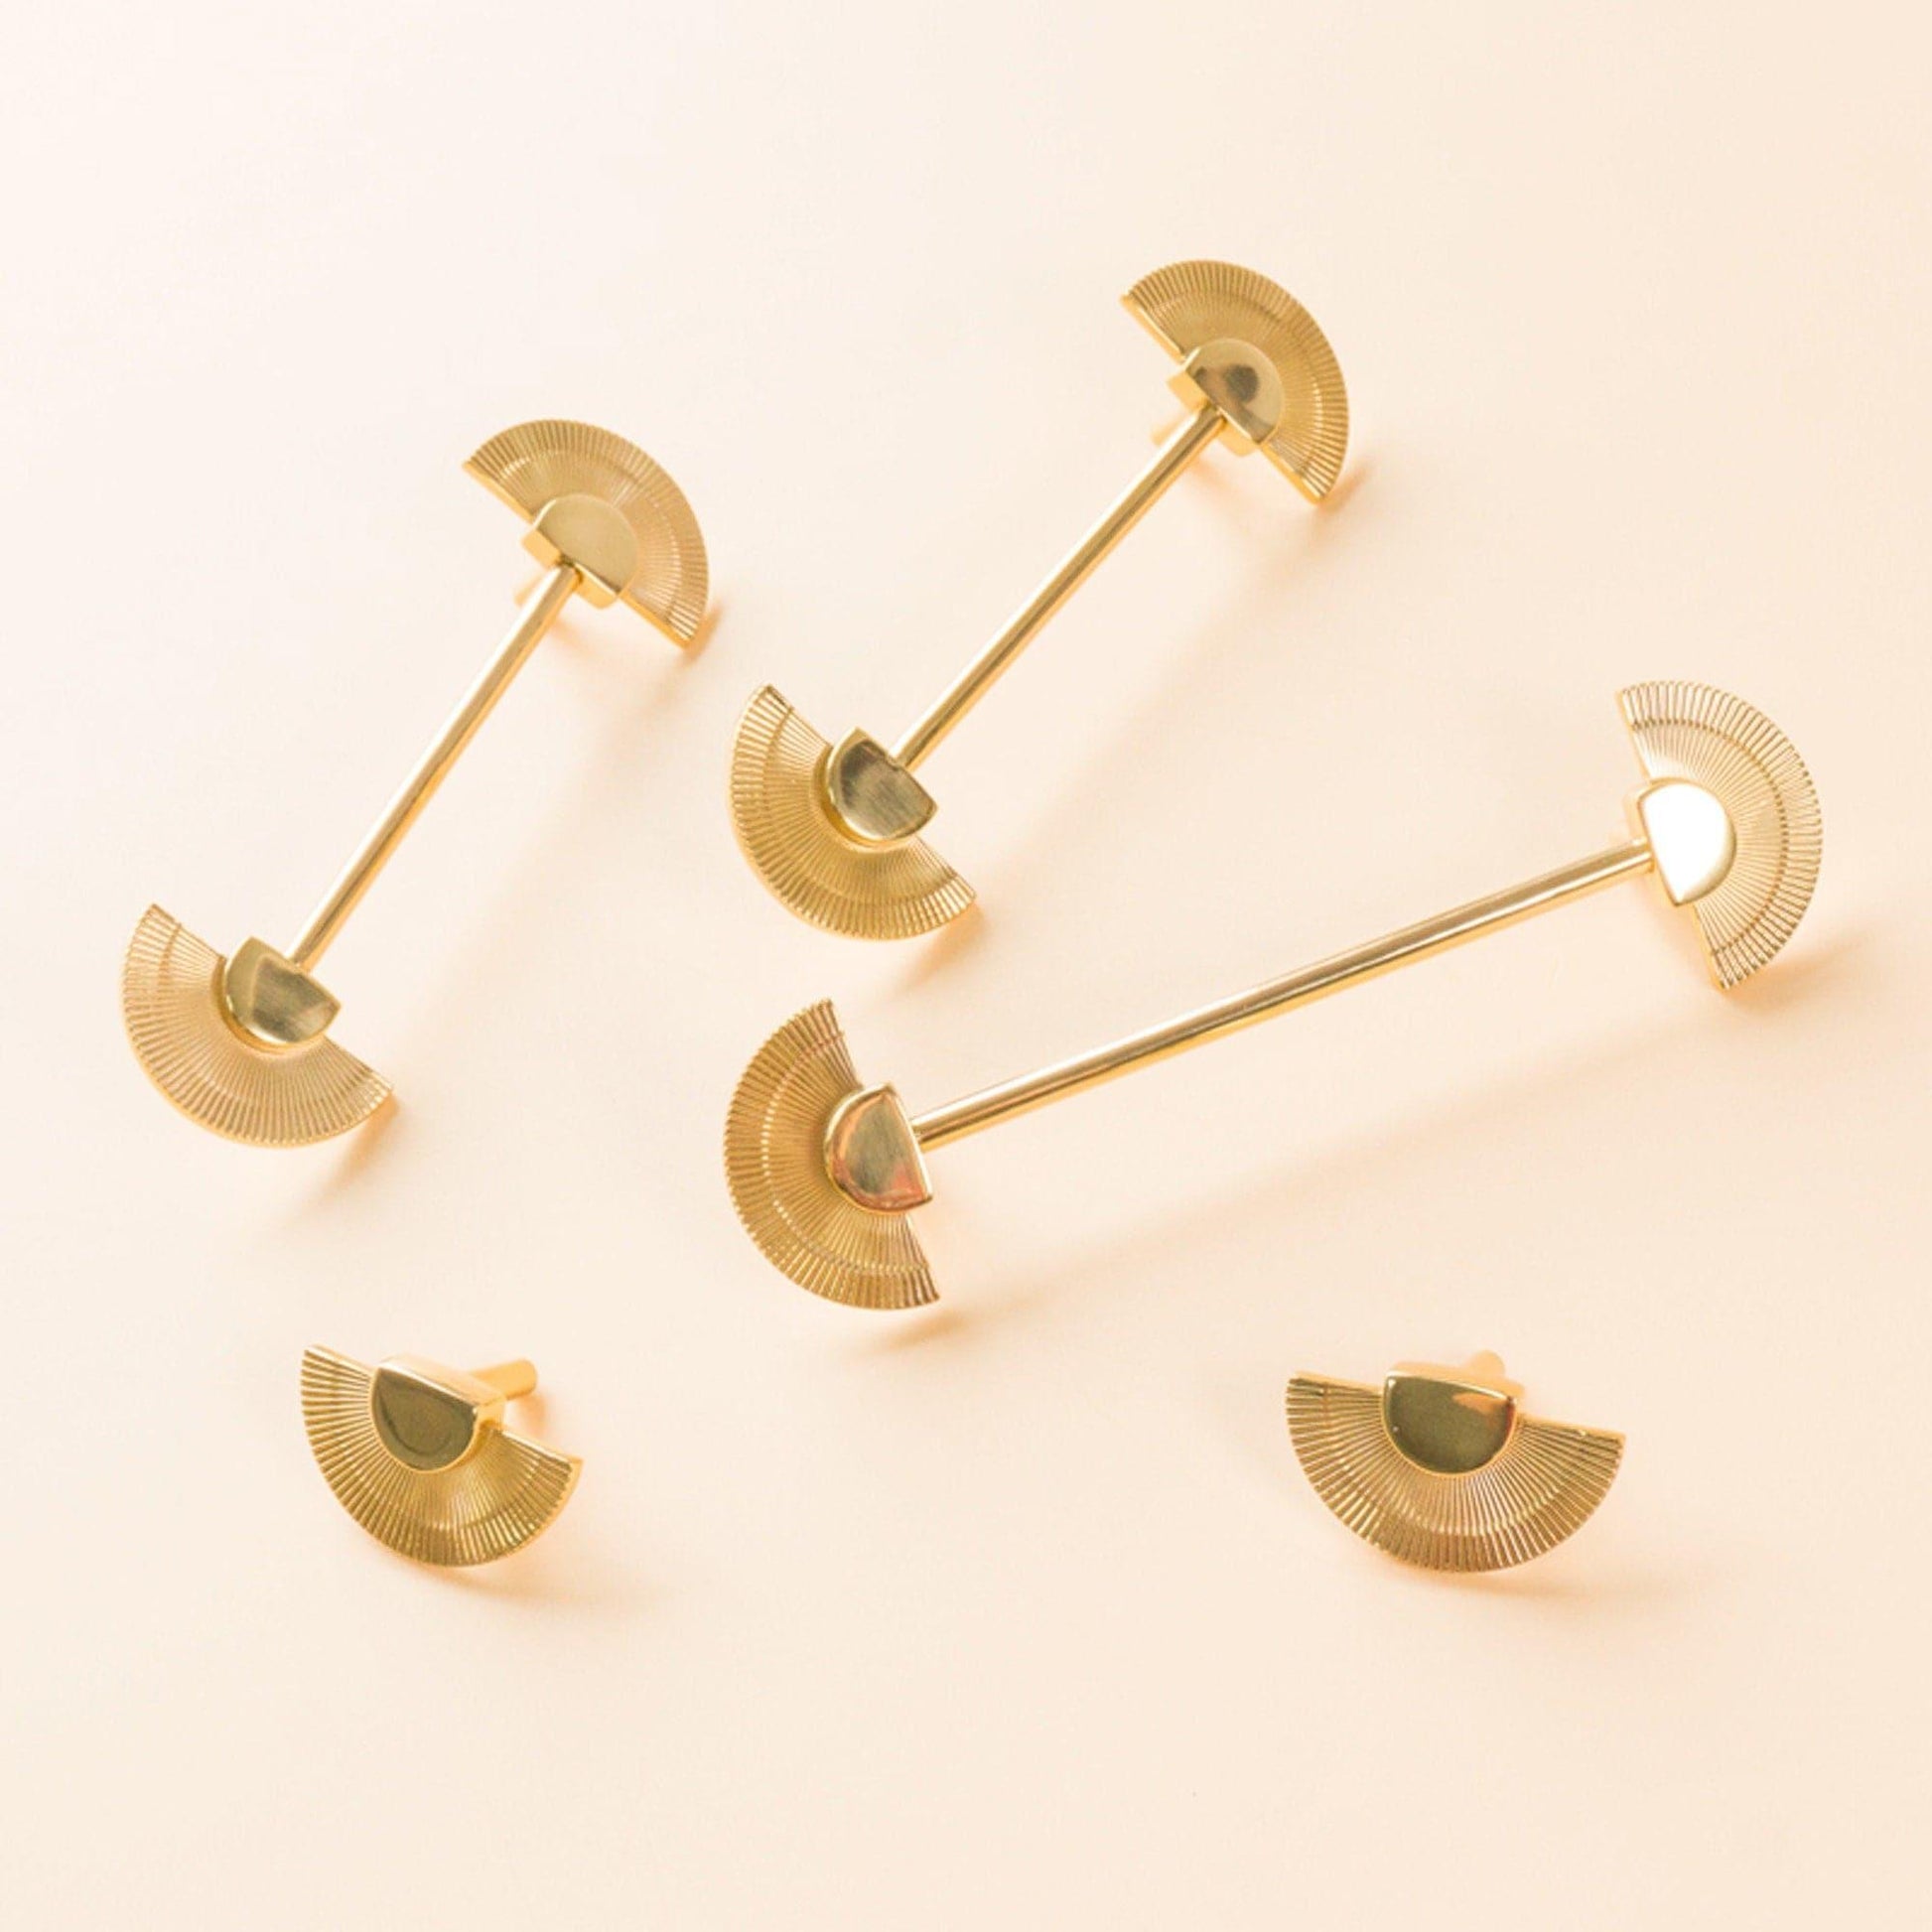 Brass Fan-Shaped Cabinet Drawer Handle Knob - MAIA HOMES